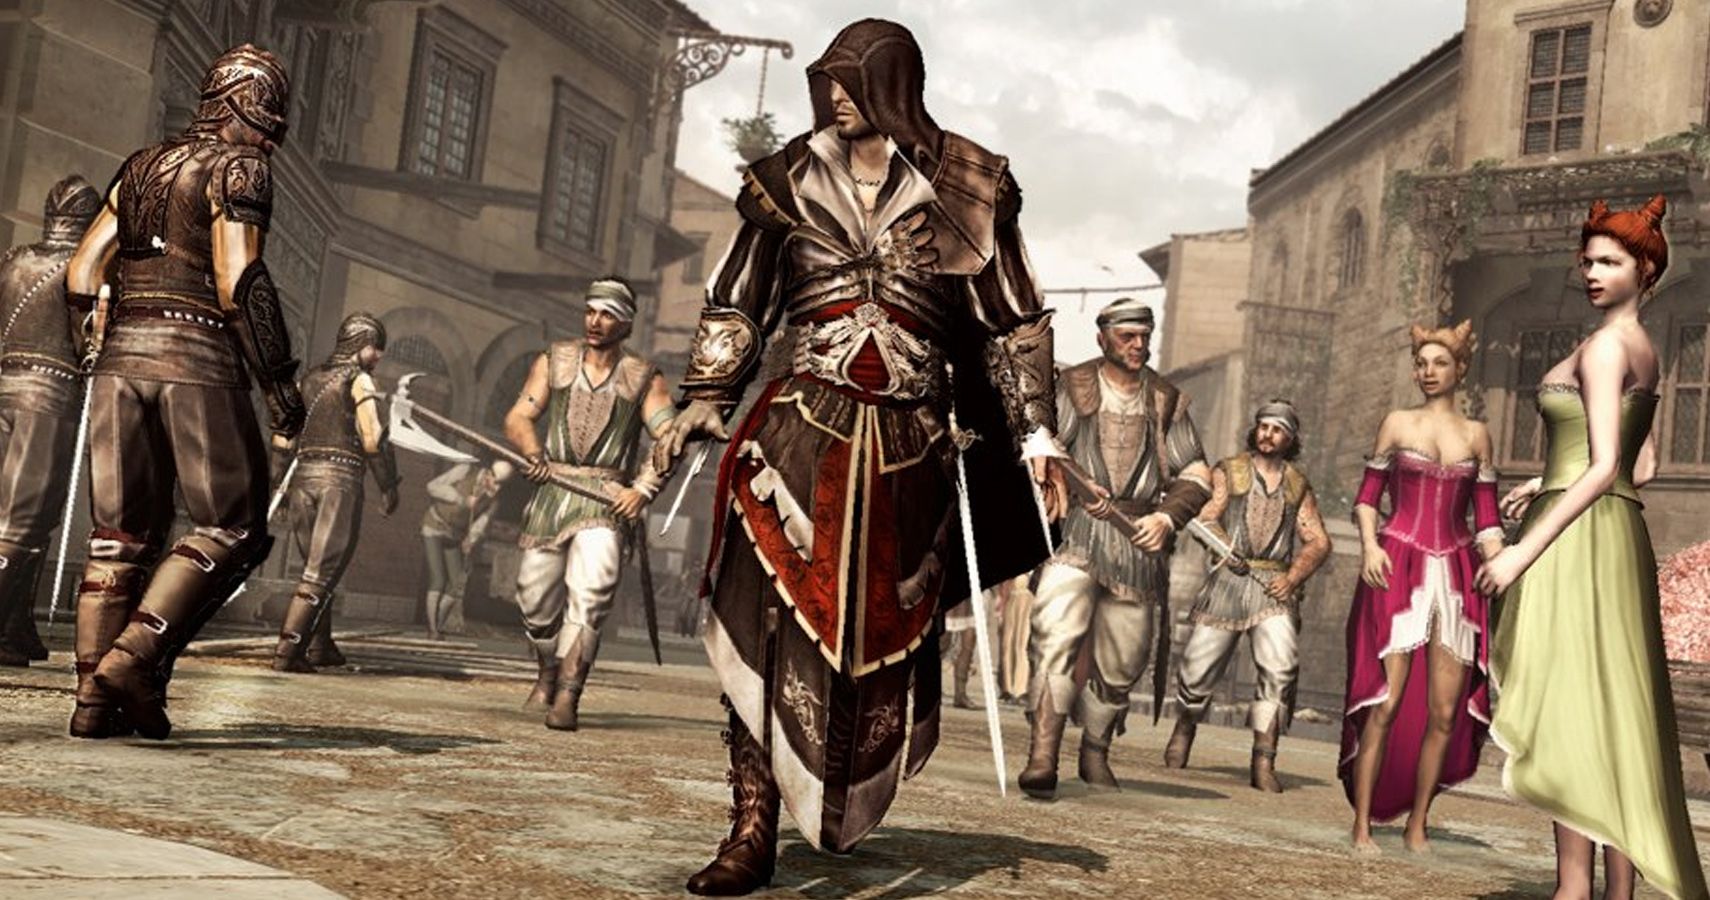 Assassins Creed 2 - Armor of Altair - Coolest suits of armor